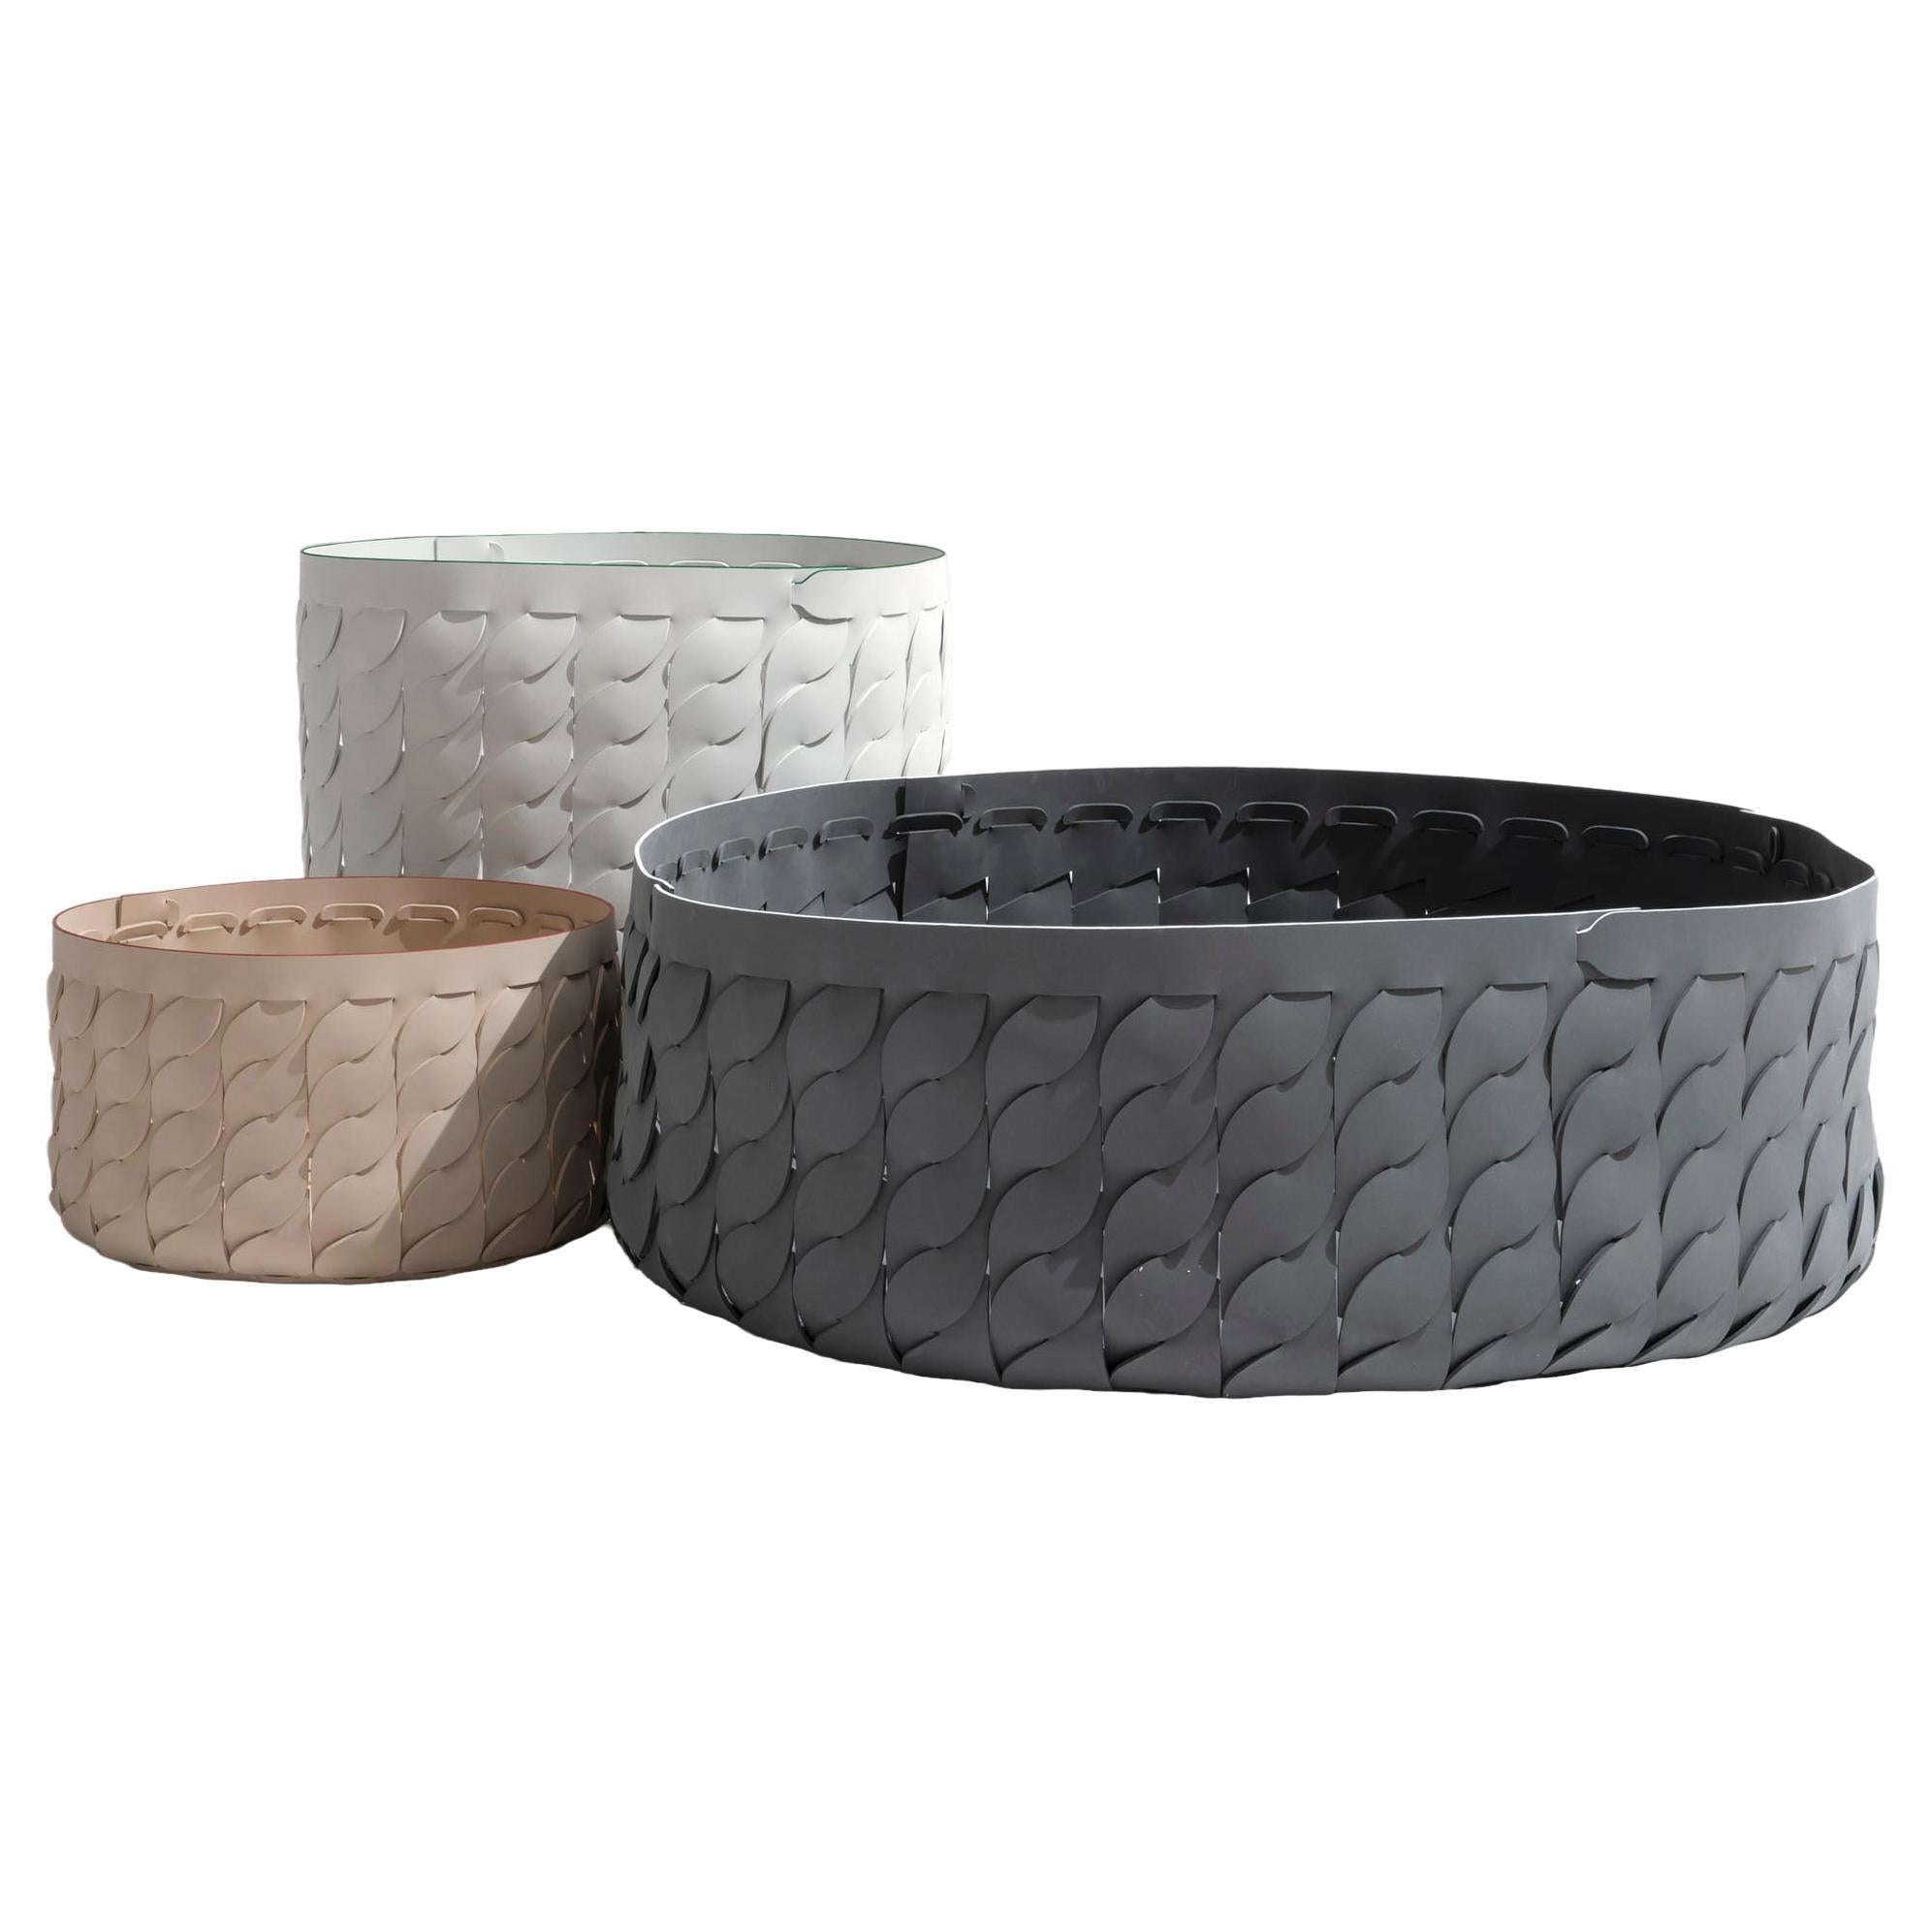 Koi eva rubber basket with contrasting profile For Sale